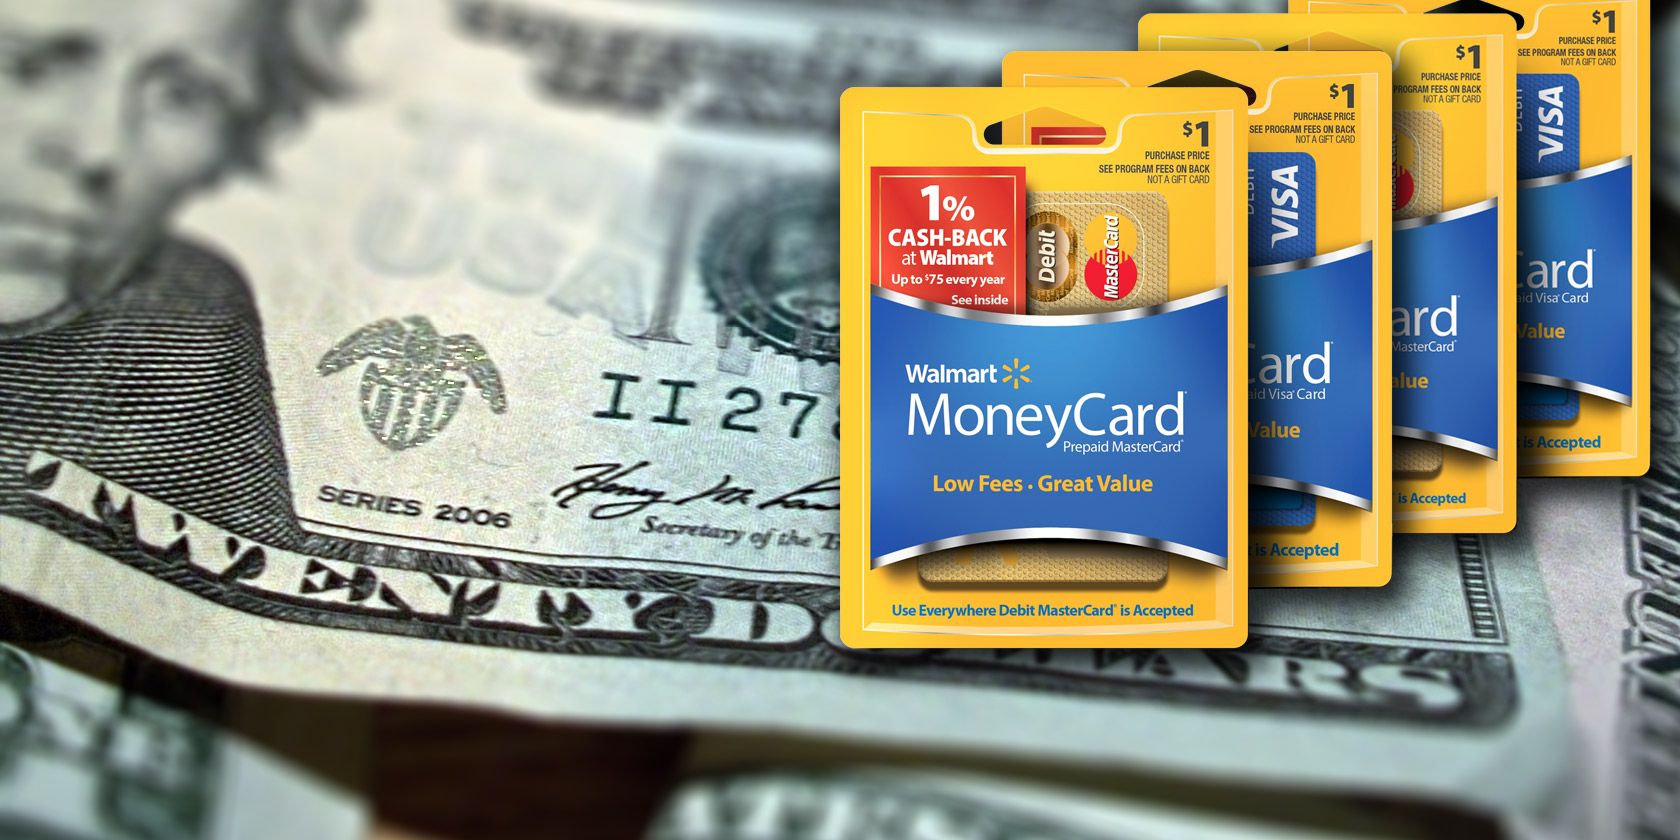 Can You Actually Save Money With the Walmart MoneyCard?